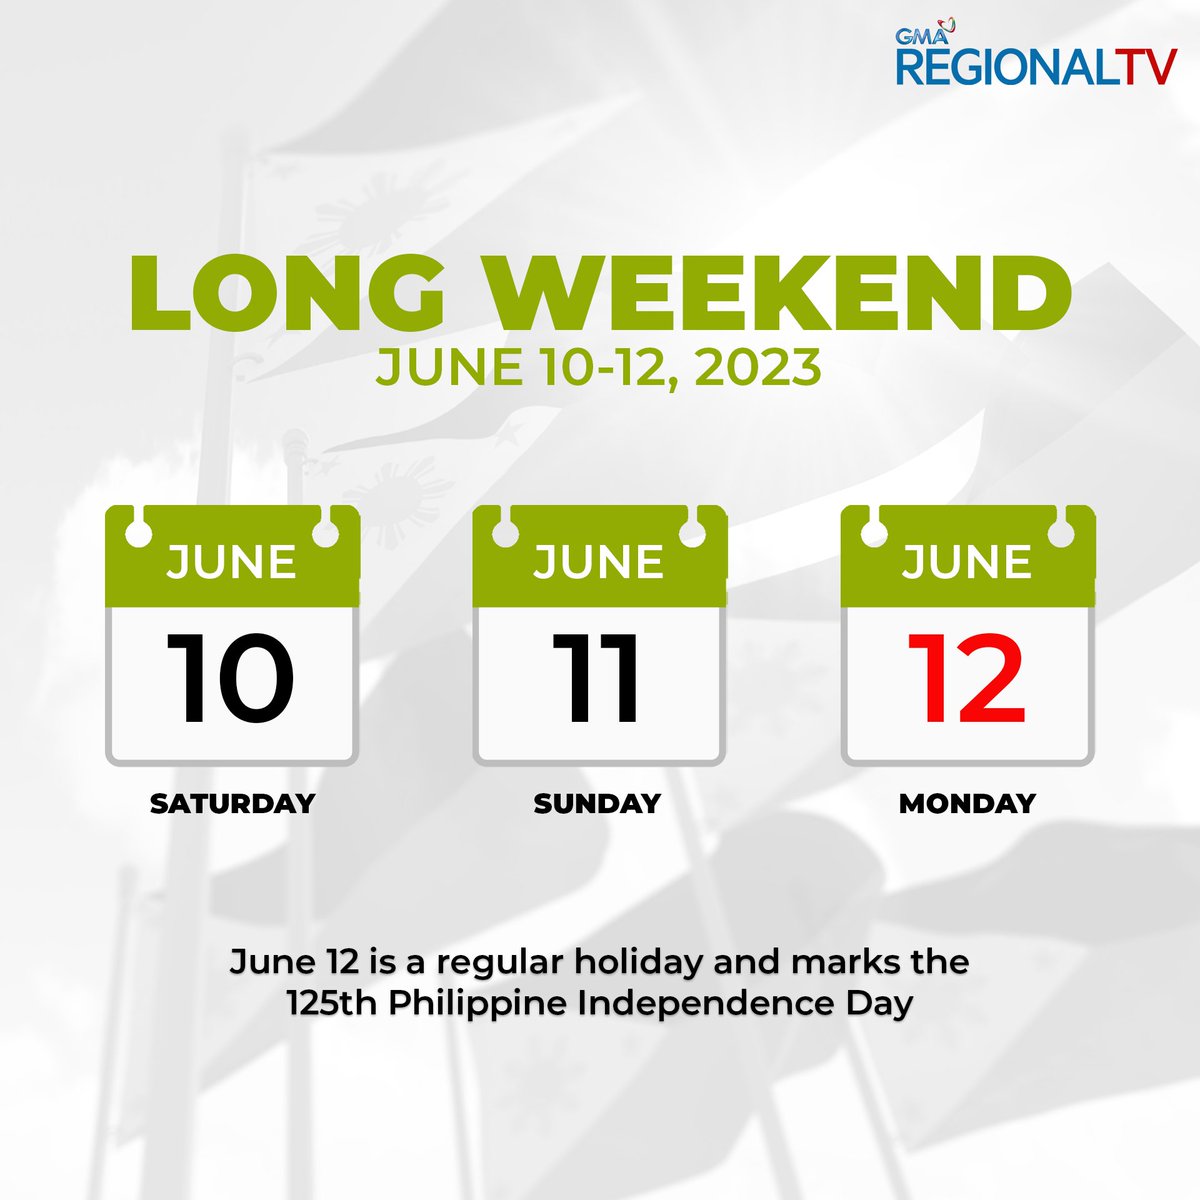 ADVISORY I NEWS UPDATE: Mark your calendars, mga Kapuso!

There is an upcoming long weekend this June as the country marks the 125th Philippine Independence Day on Monday, June 12, 2023.

#GMARegionalTV
#LocalNewsMatters
#GMAIntegratedNews